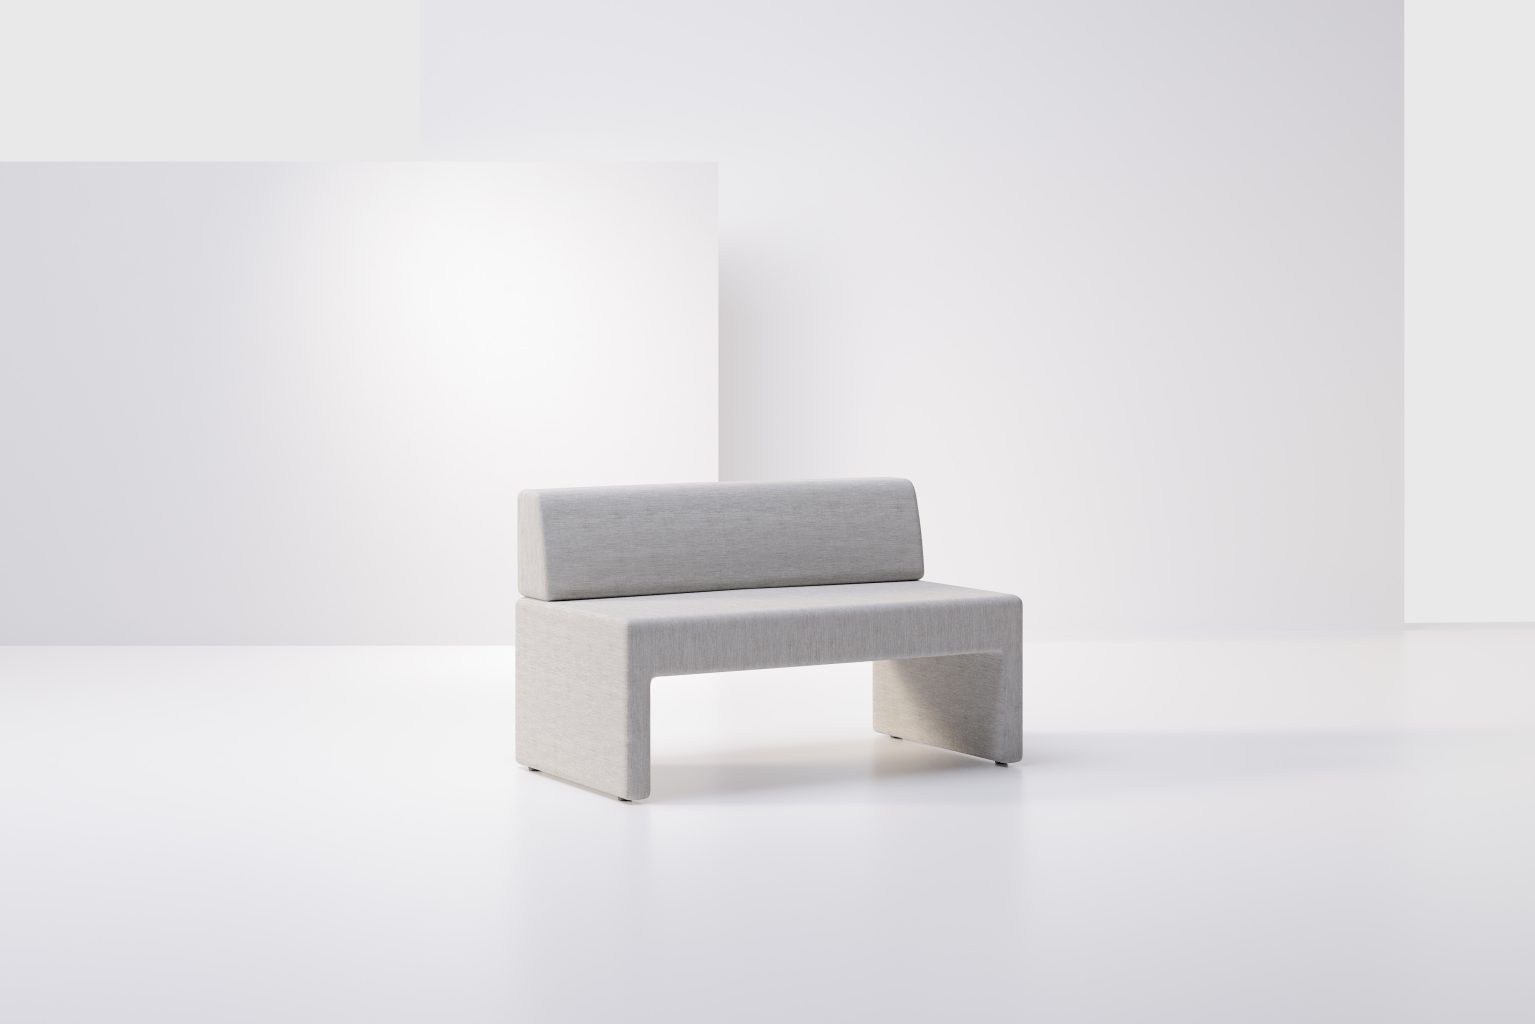 Charlotte 48 Bench Product Image 2